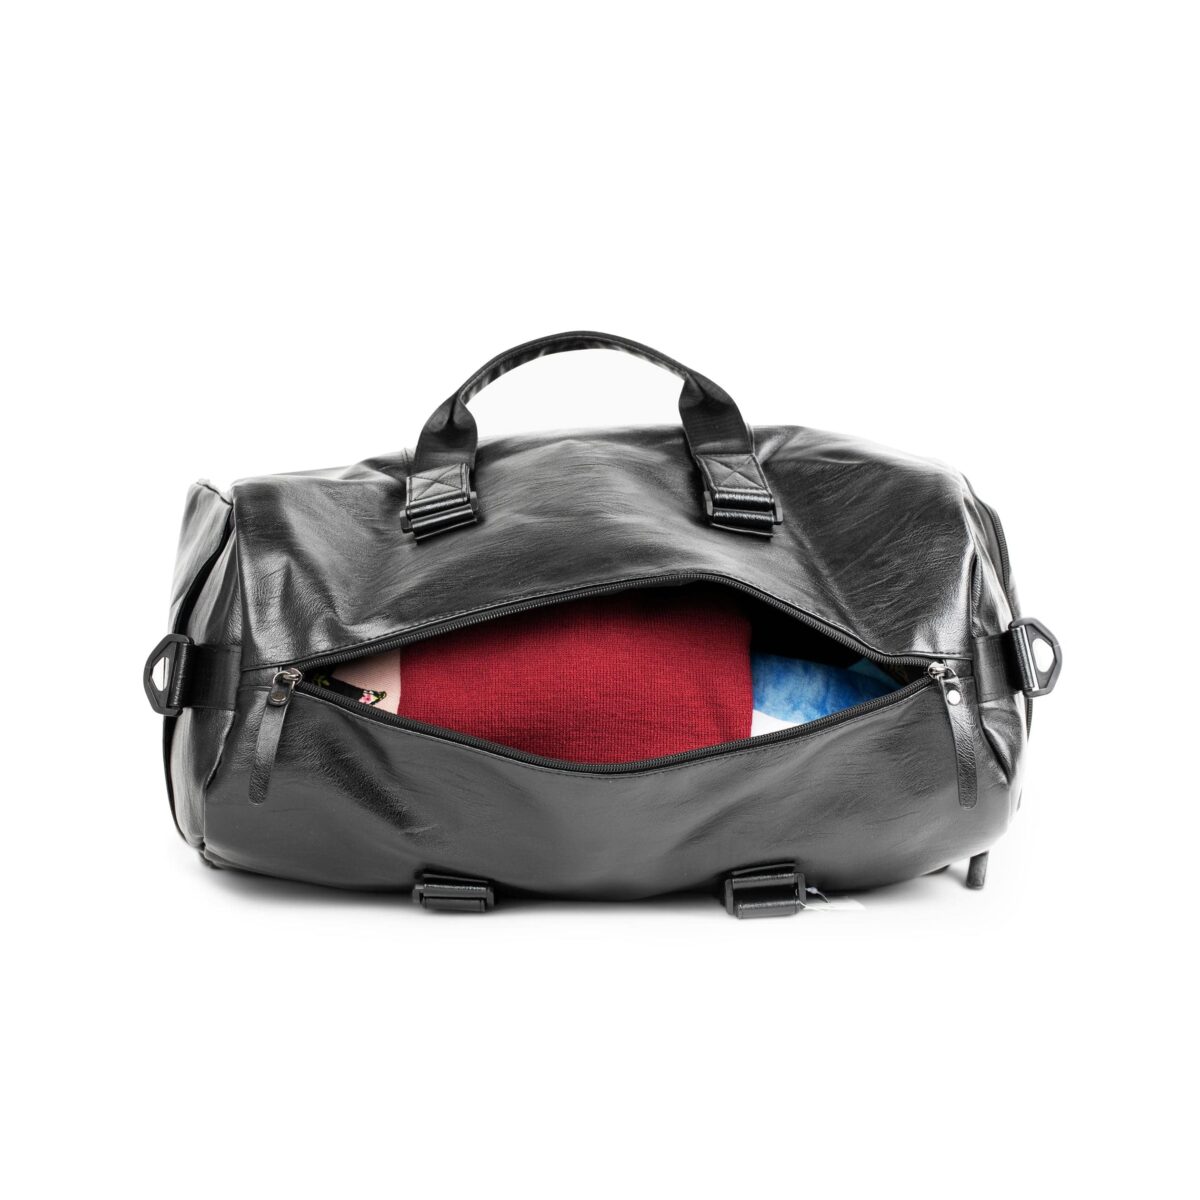 Fernway Merch Store Accessories Leather Duffle Bag